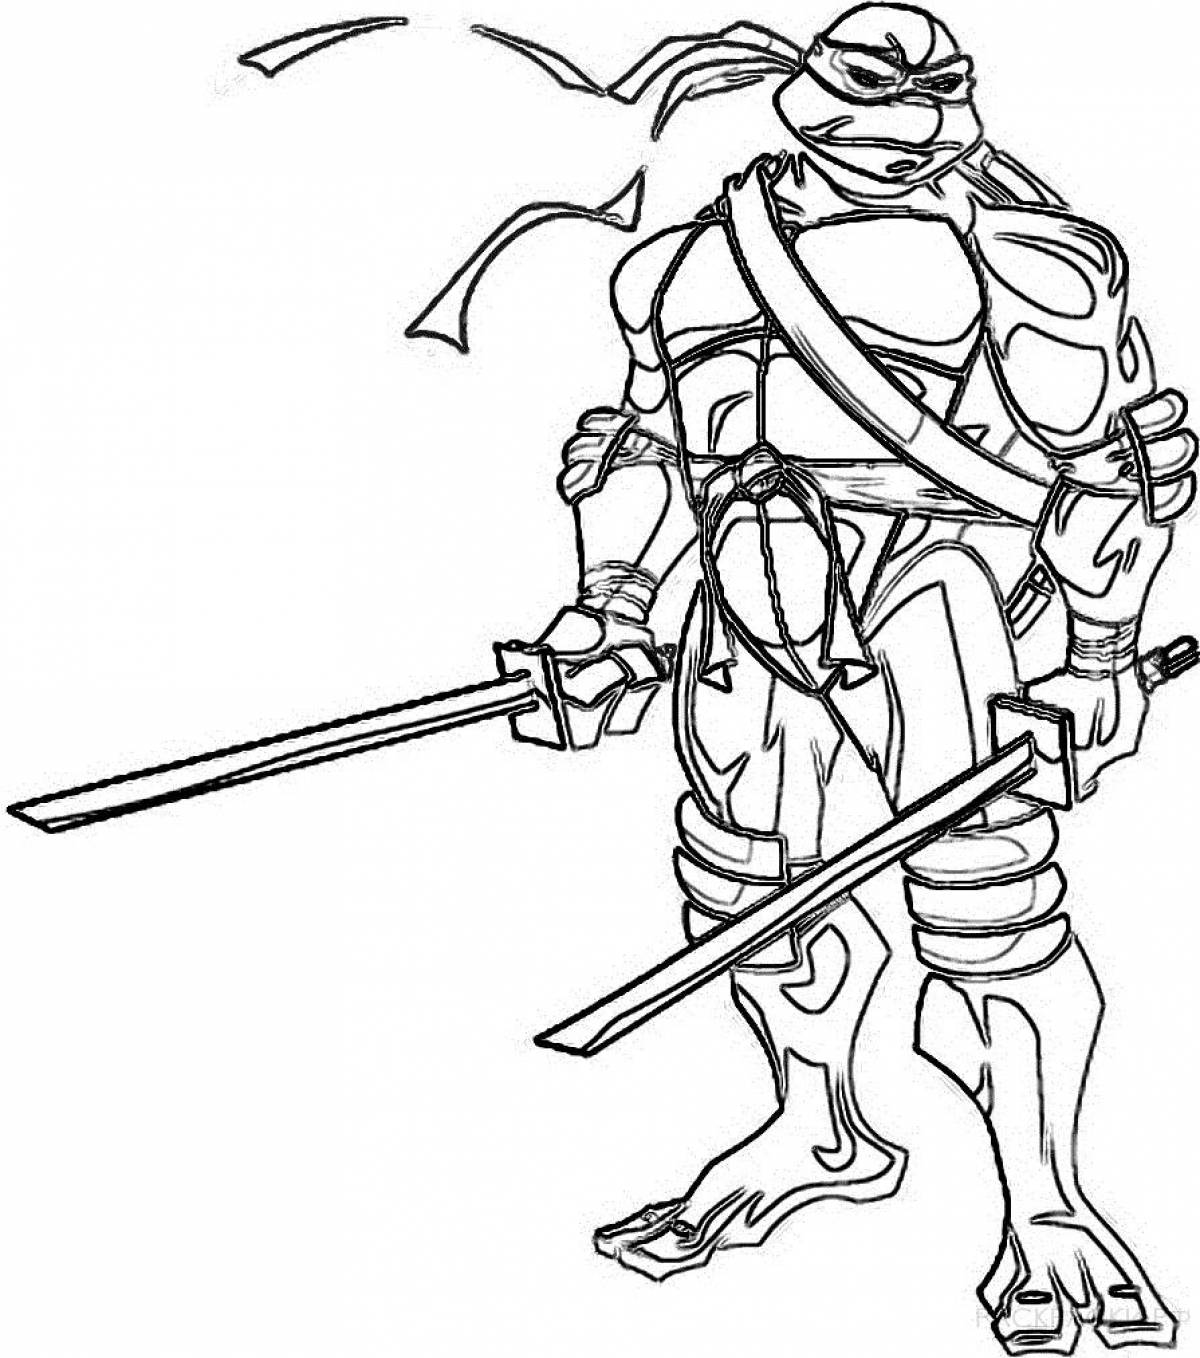 Animus coloring pages